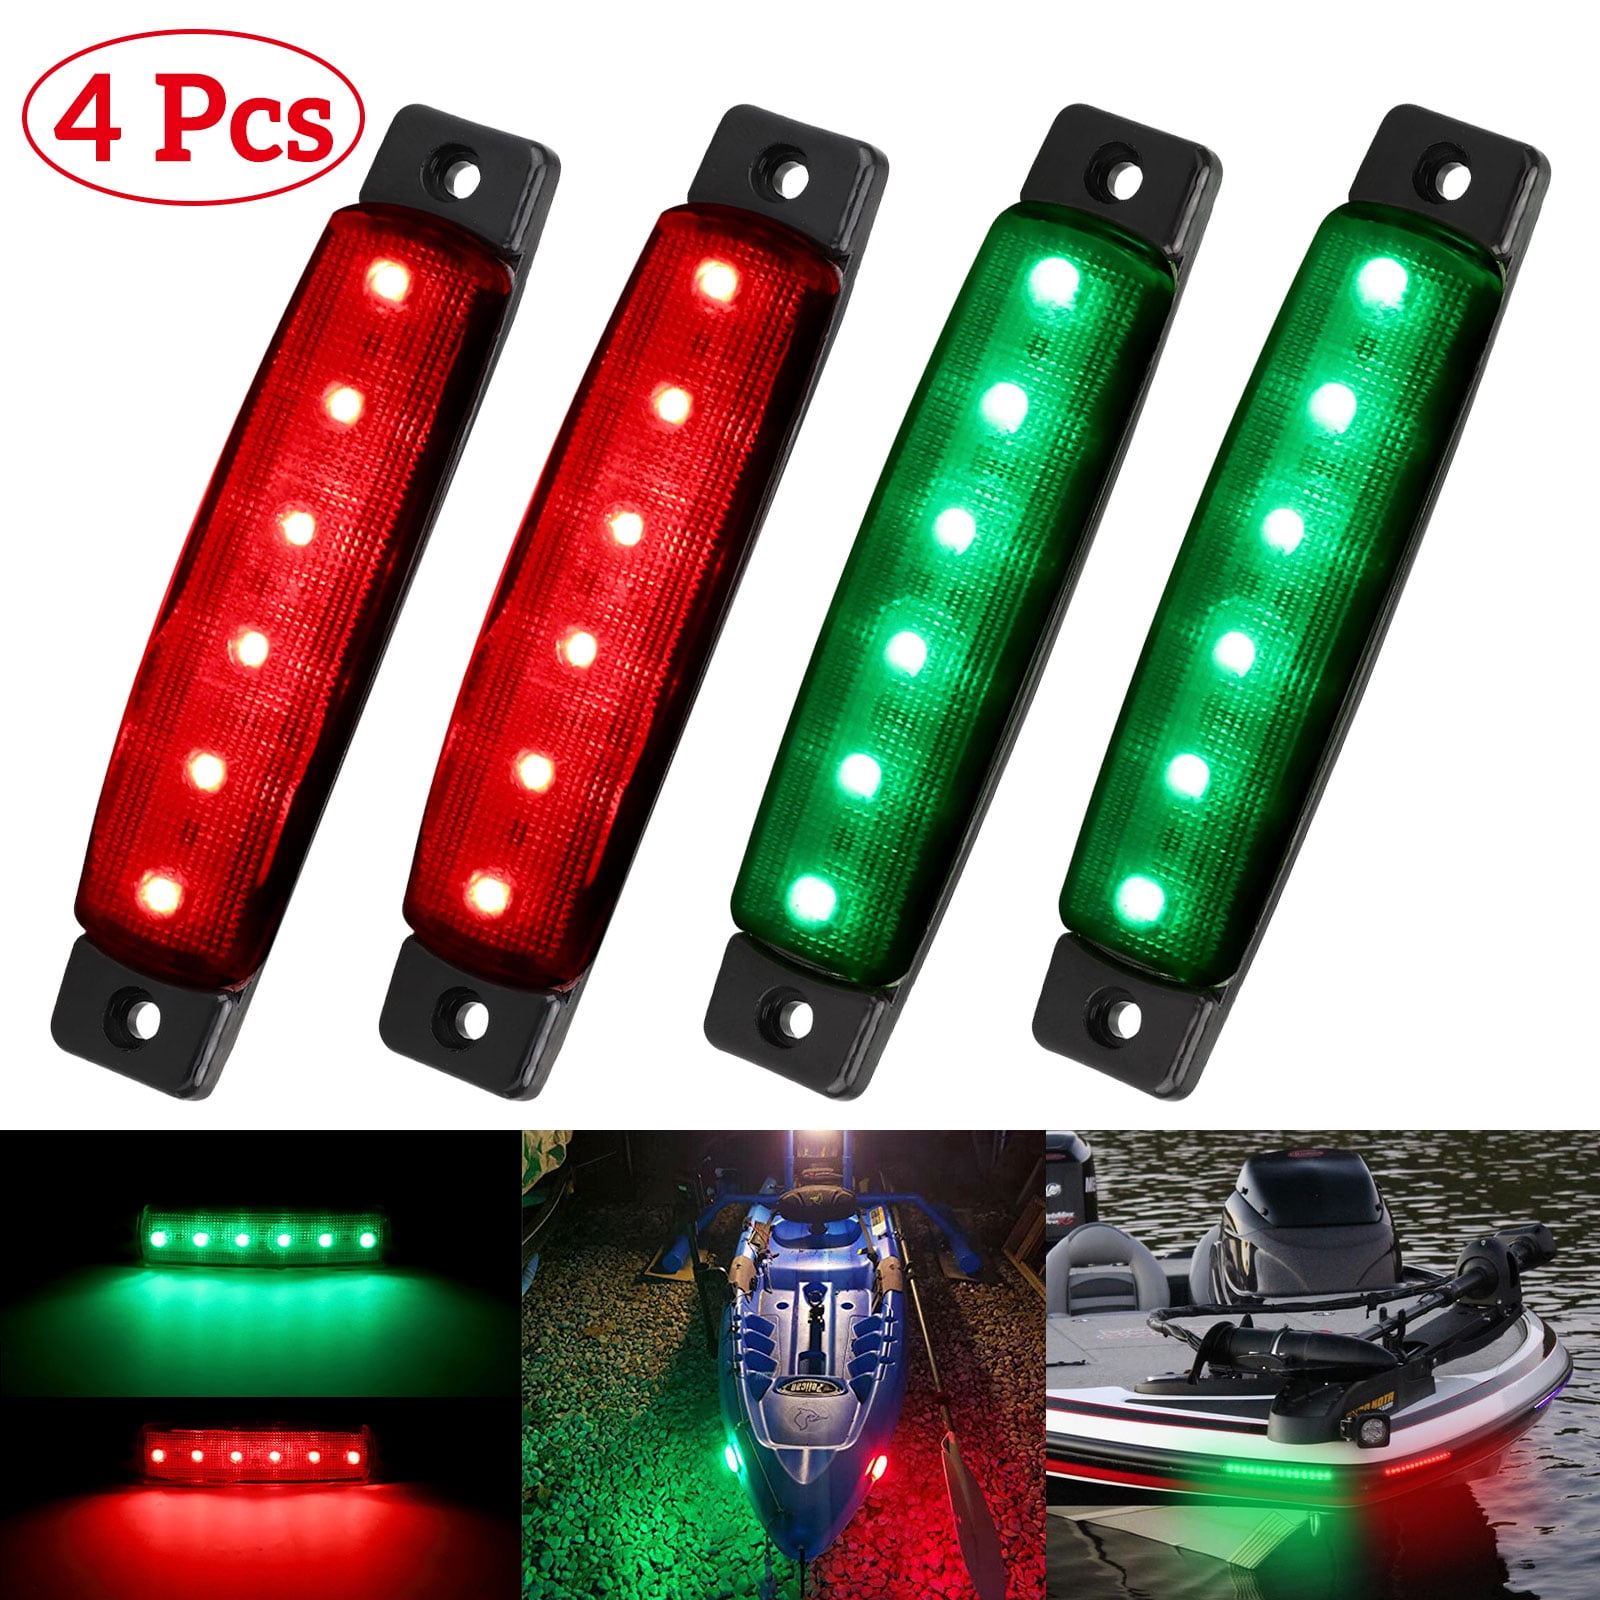 4pcs Kayak Lights Kit for Night Navigation Battery Operated Assorted Colors 